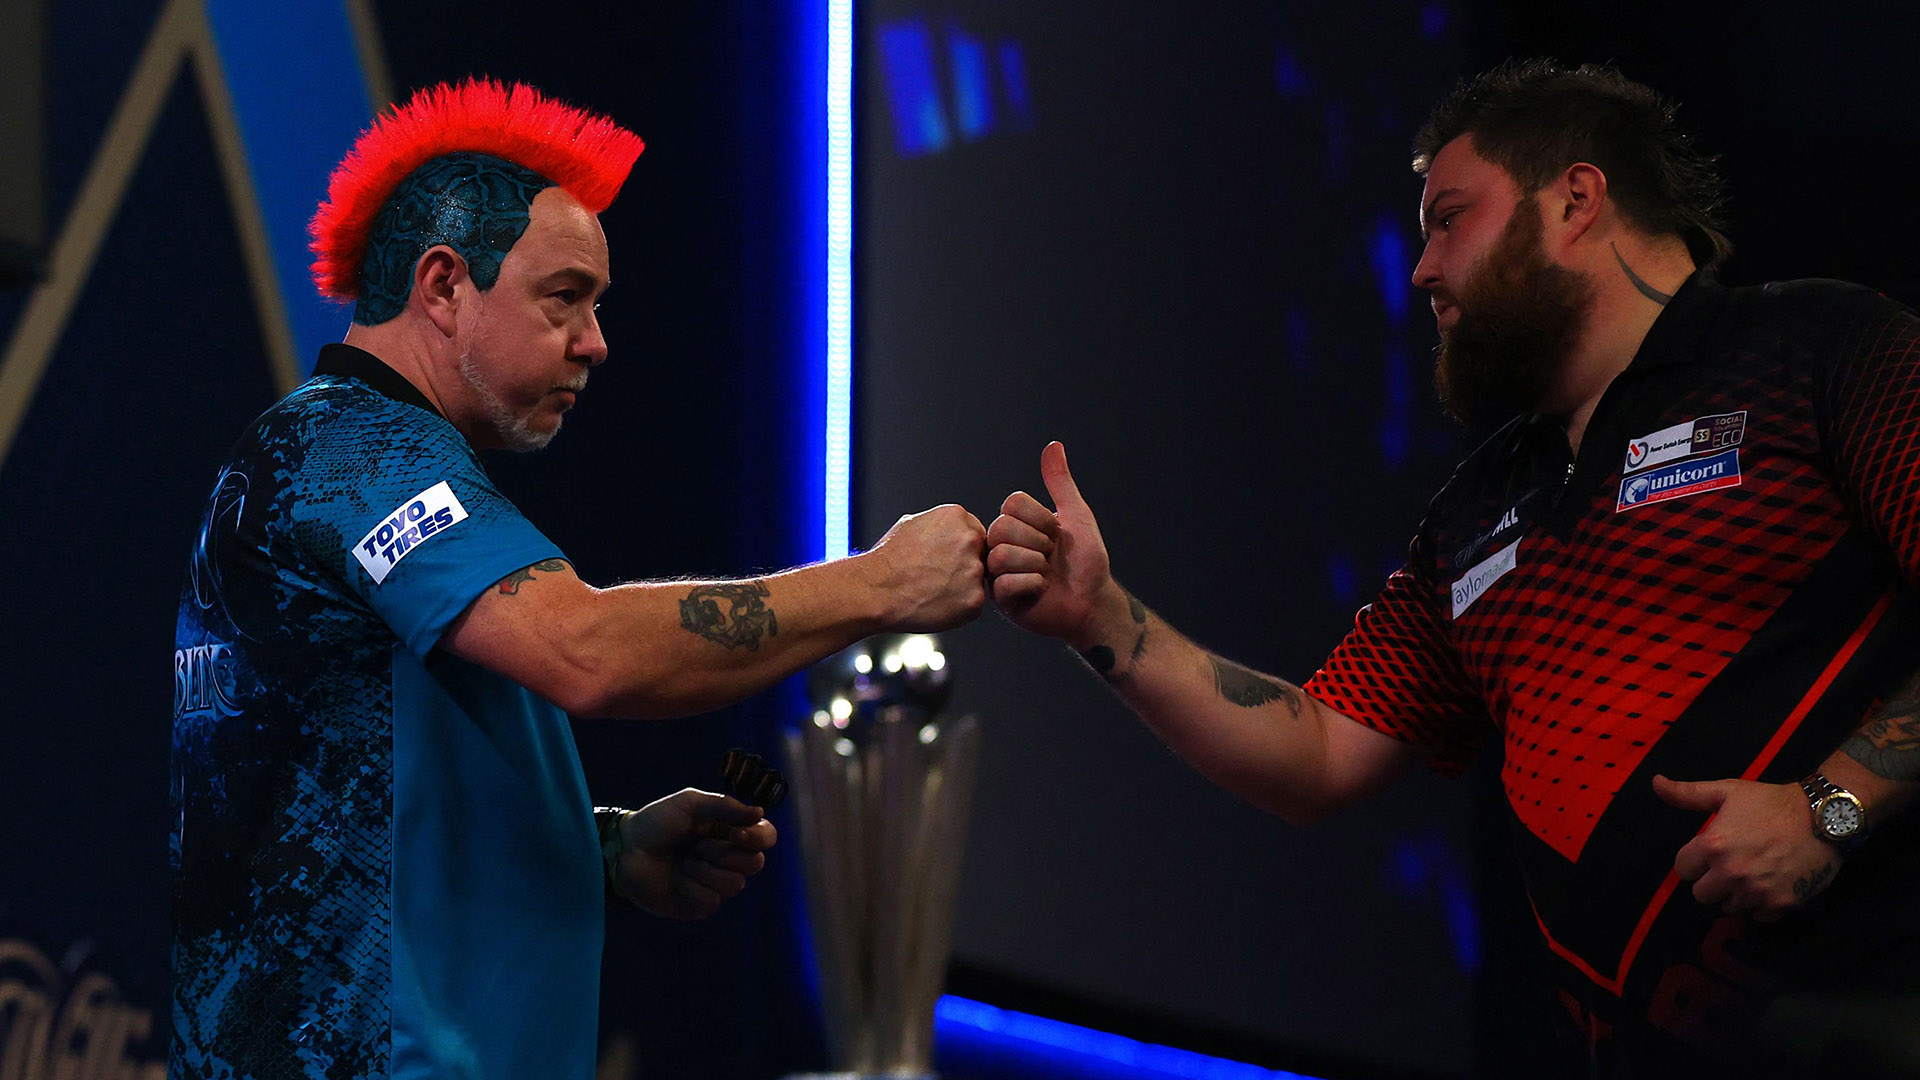 PDC World Darts Championship 2022 Draw, schedule, betting odds, results and live Sky Sports TV coverage